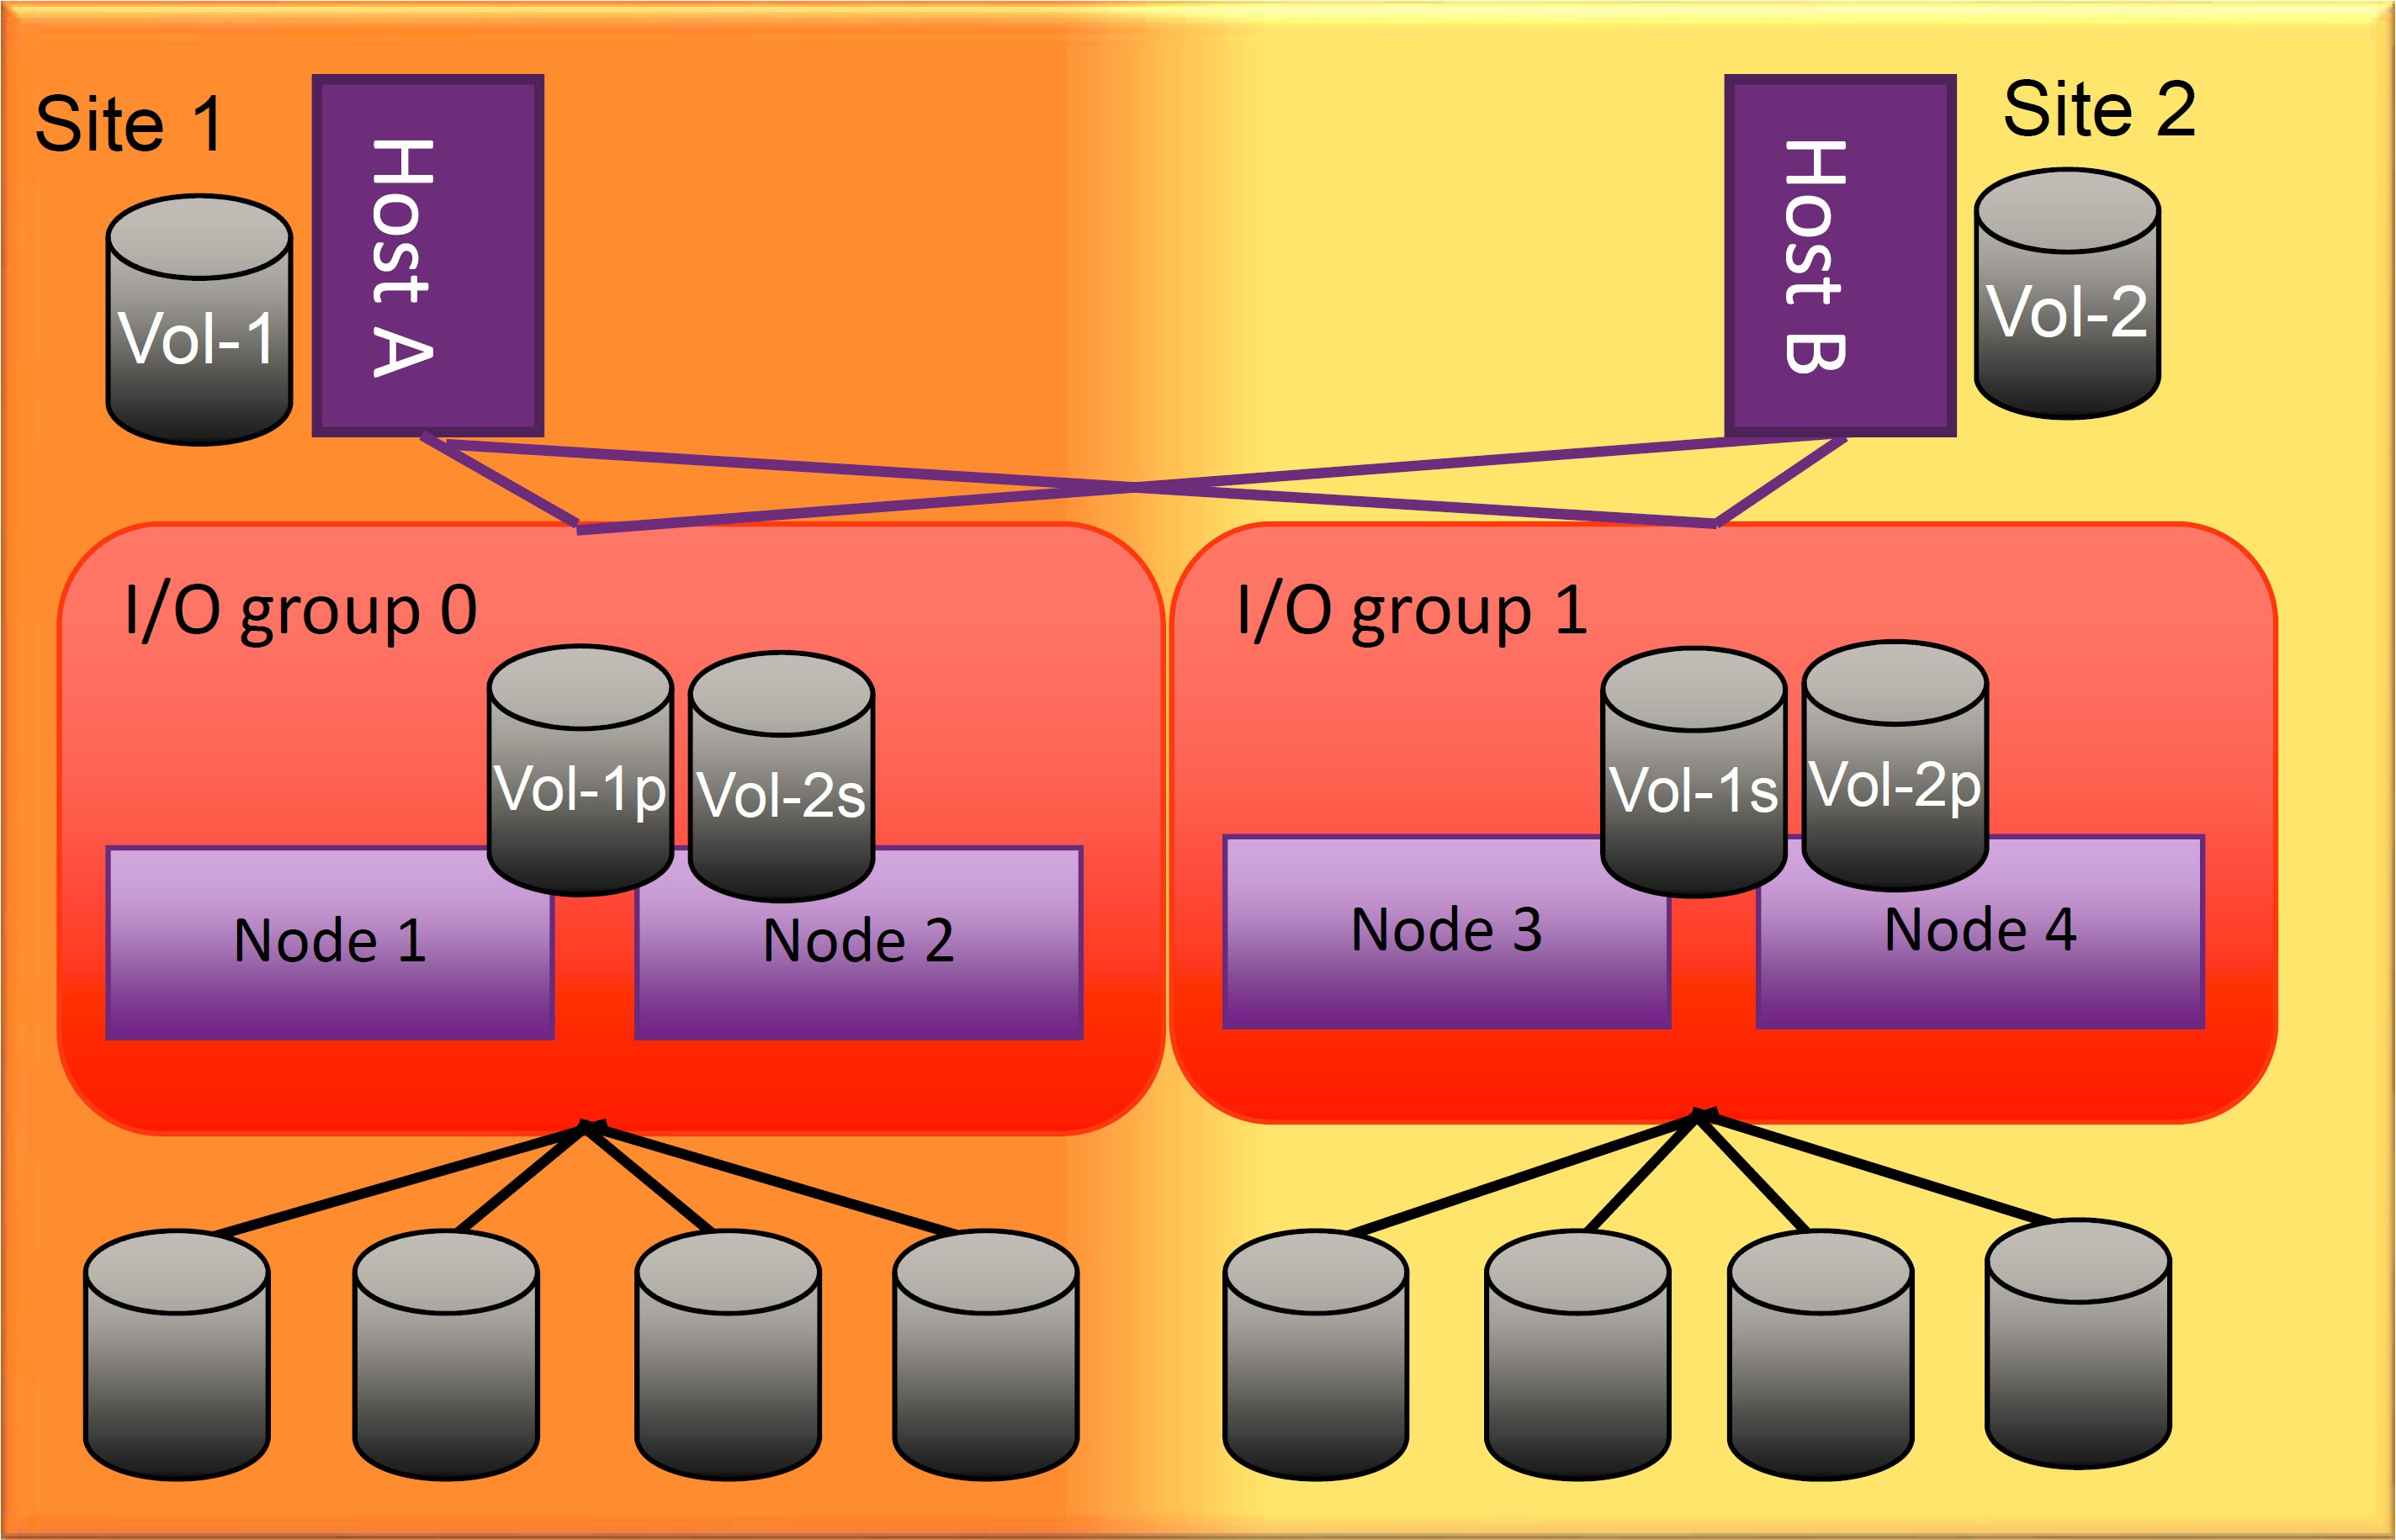 Interconnectivity: Host A, I/O group 0 with Nodes 1 & 2, and Host B, I/O group 1 with Nodes 3 & 4